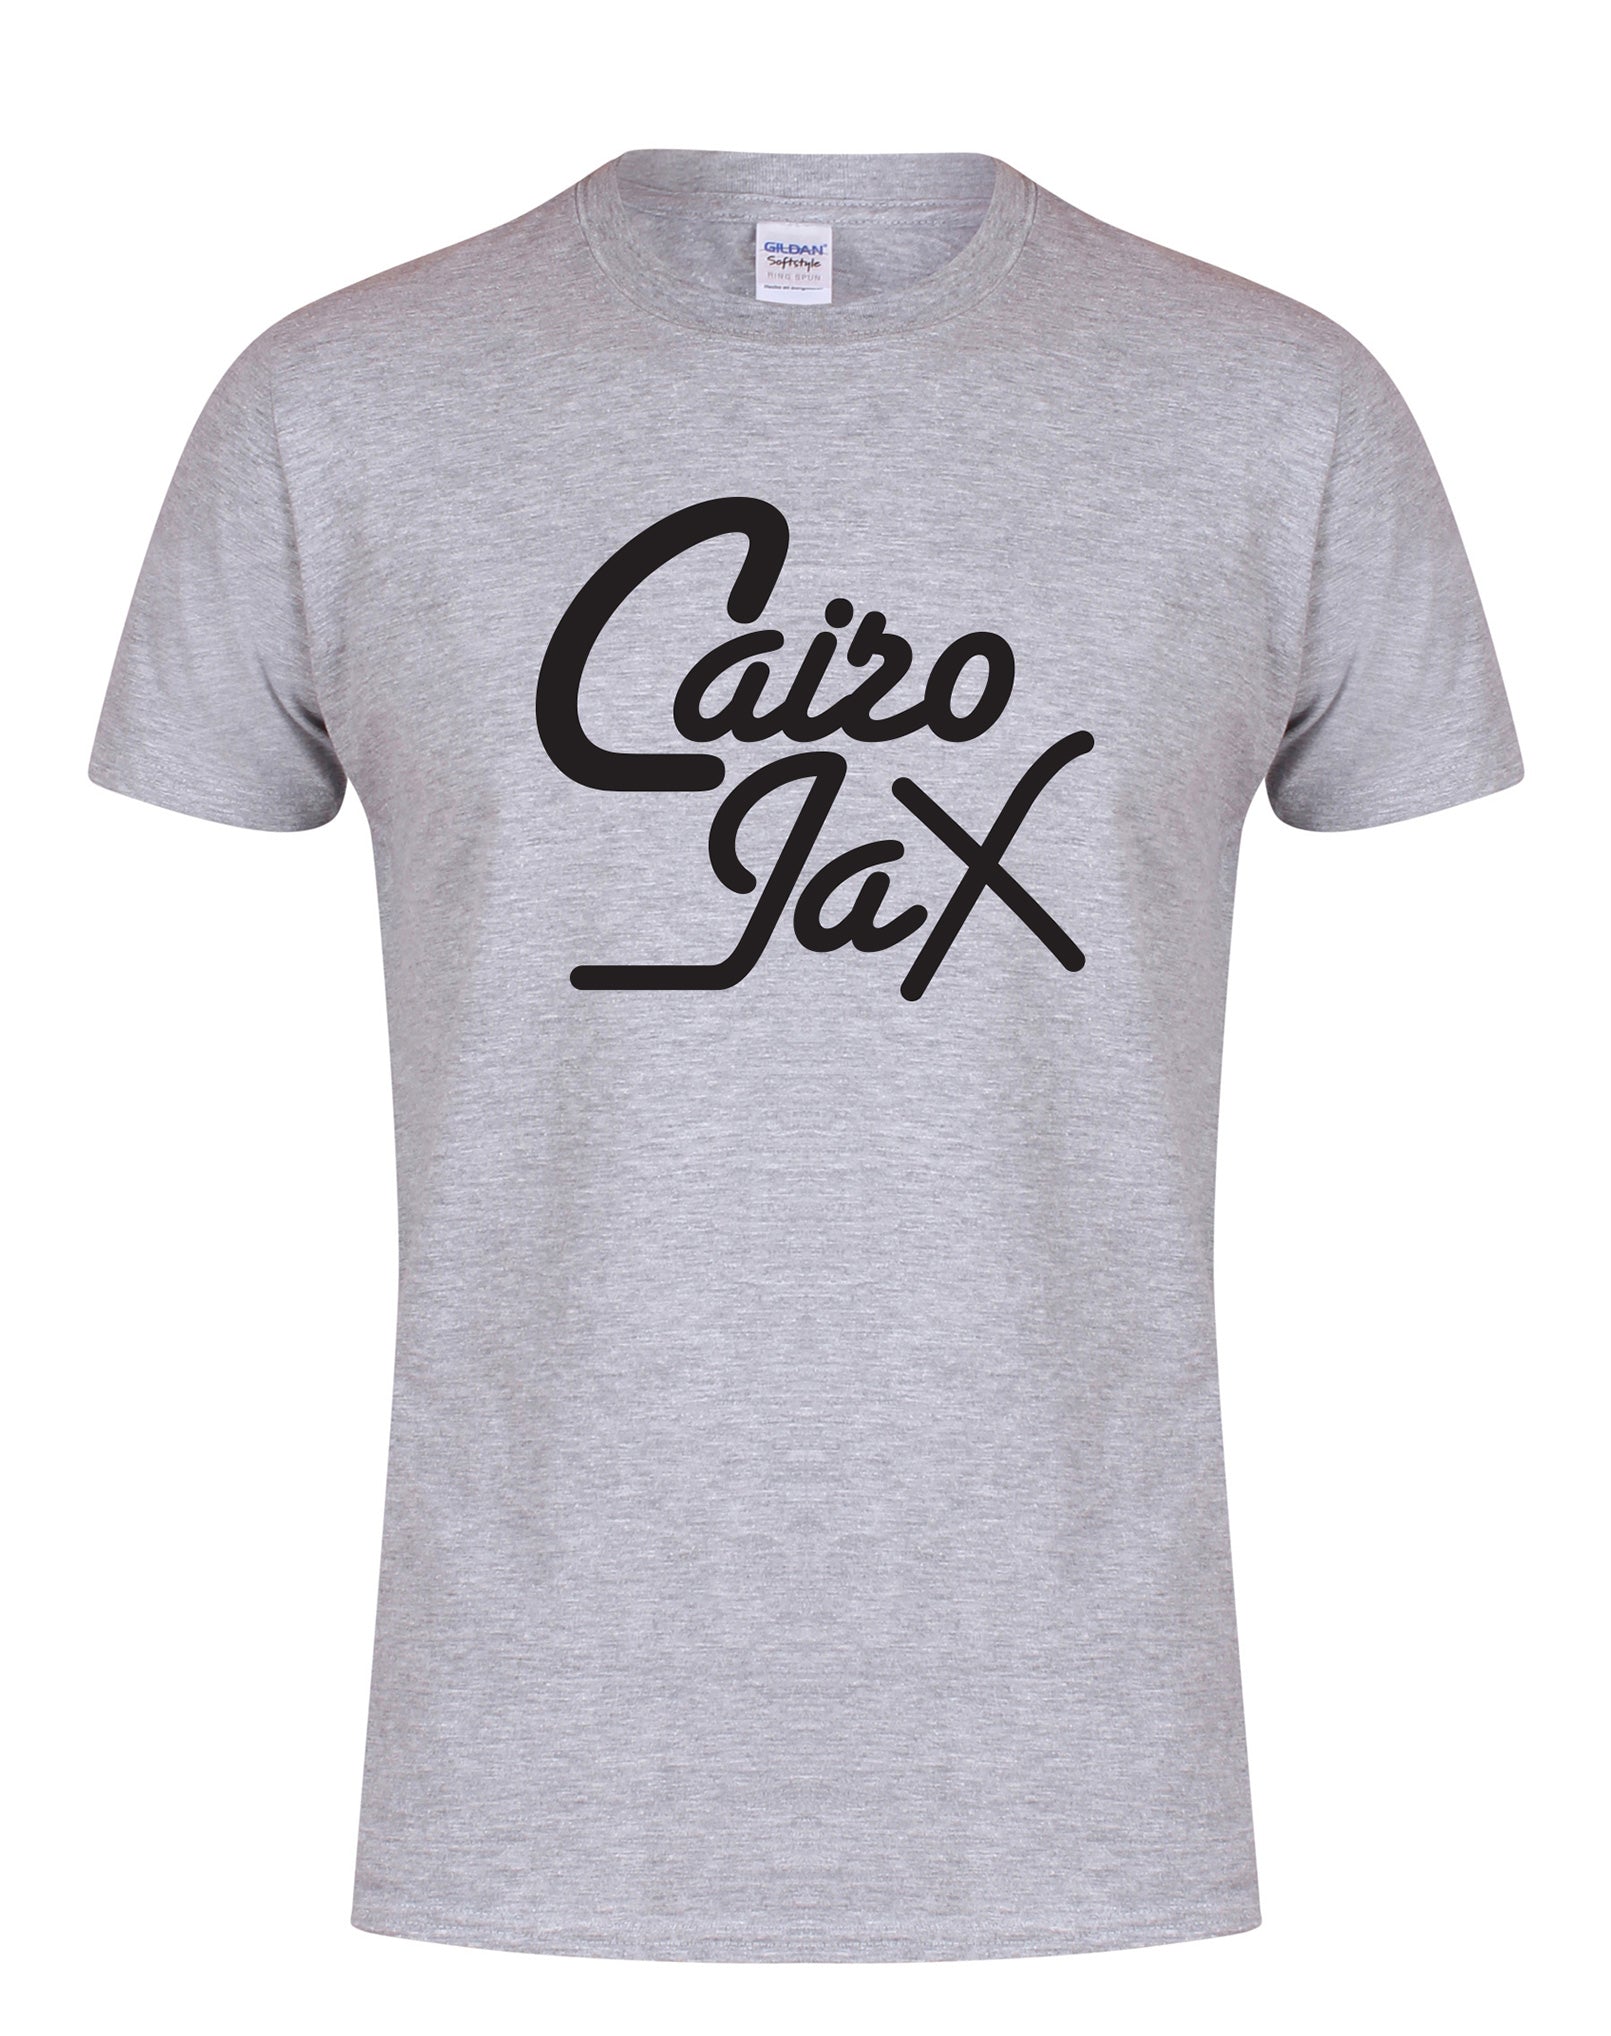 Cairo Jax unisex fit T-shirt - various colours - Dirty Stop Outs